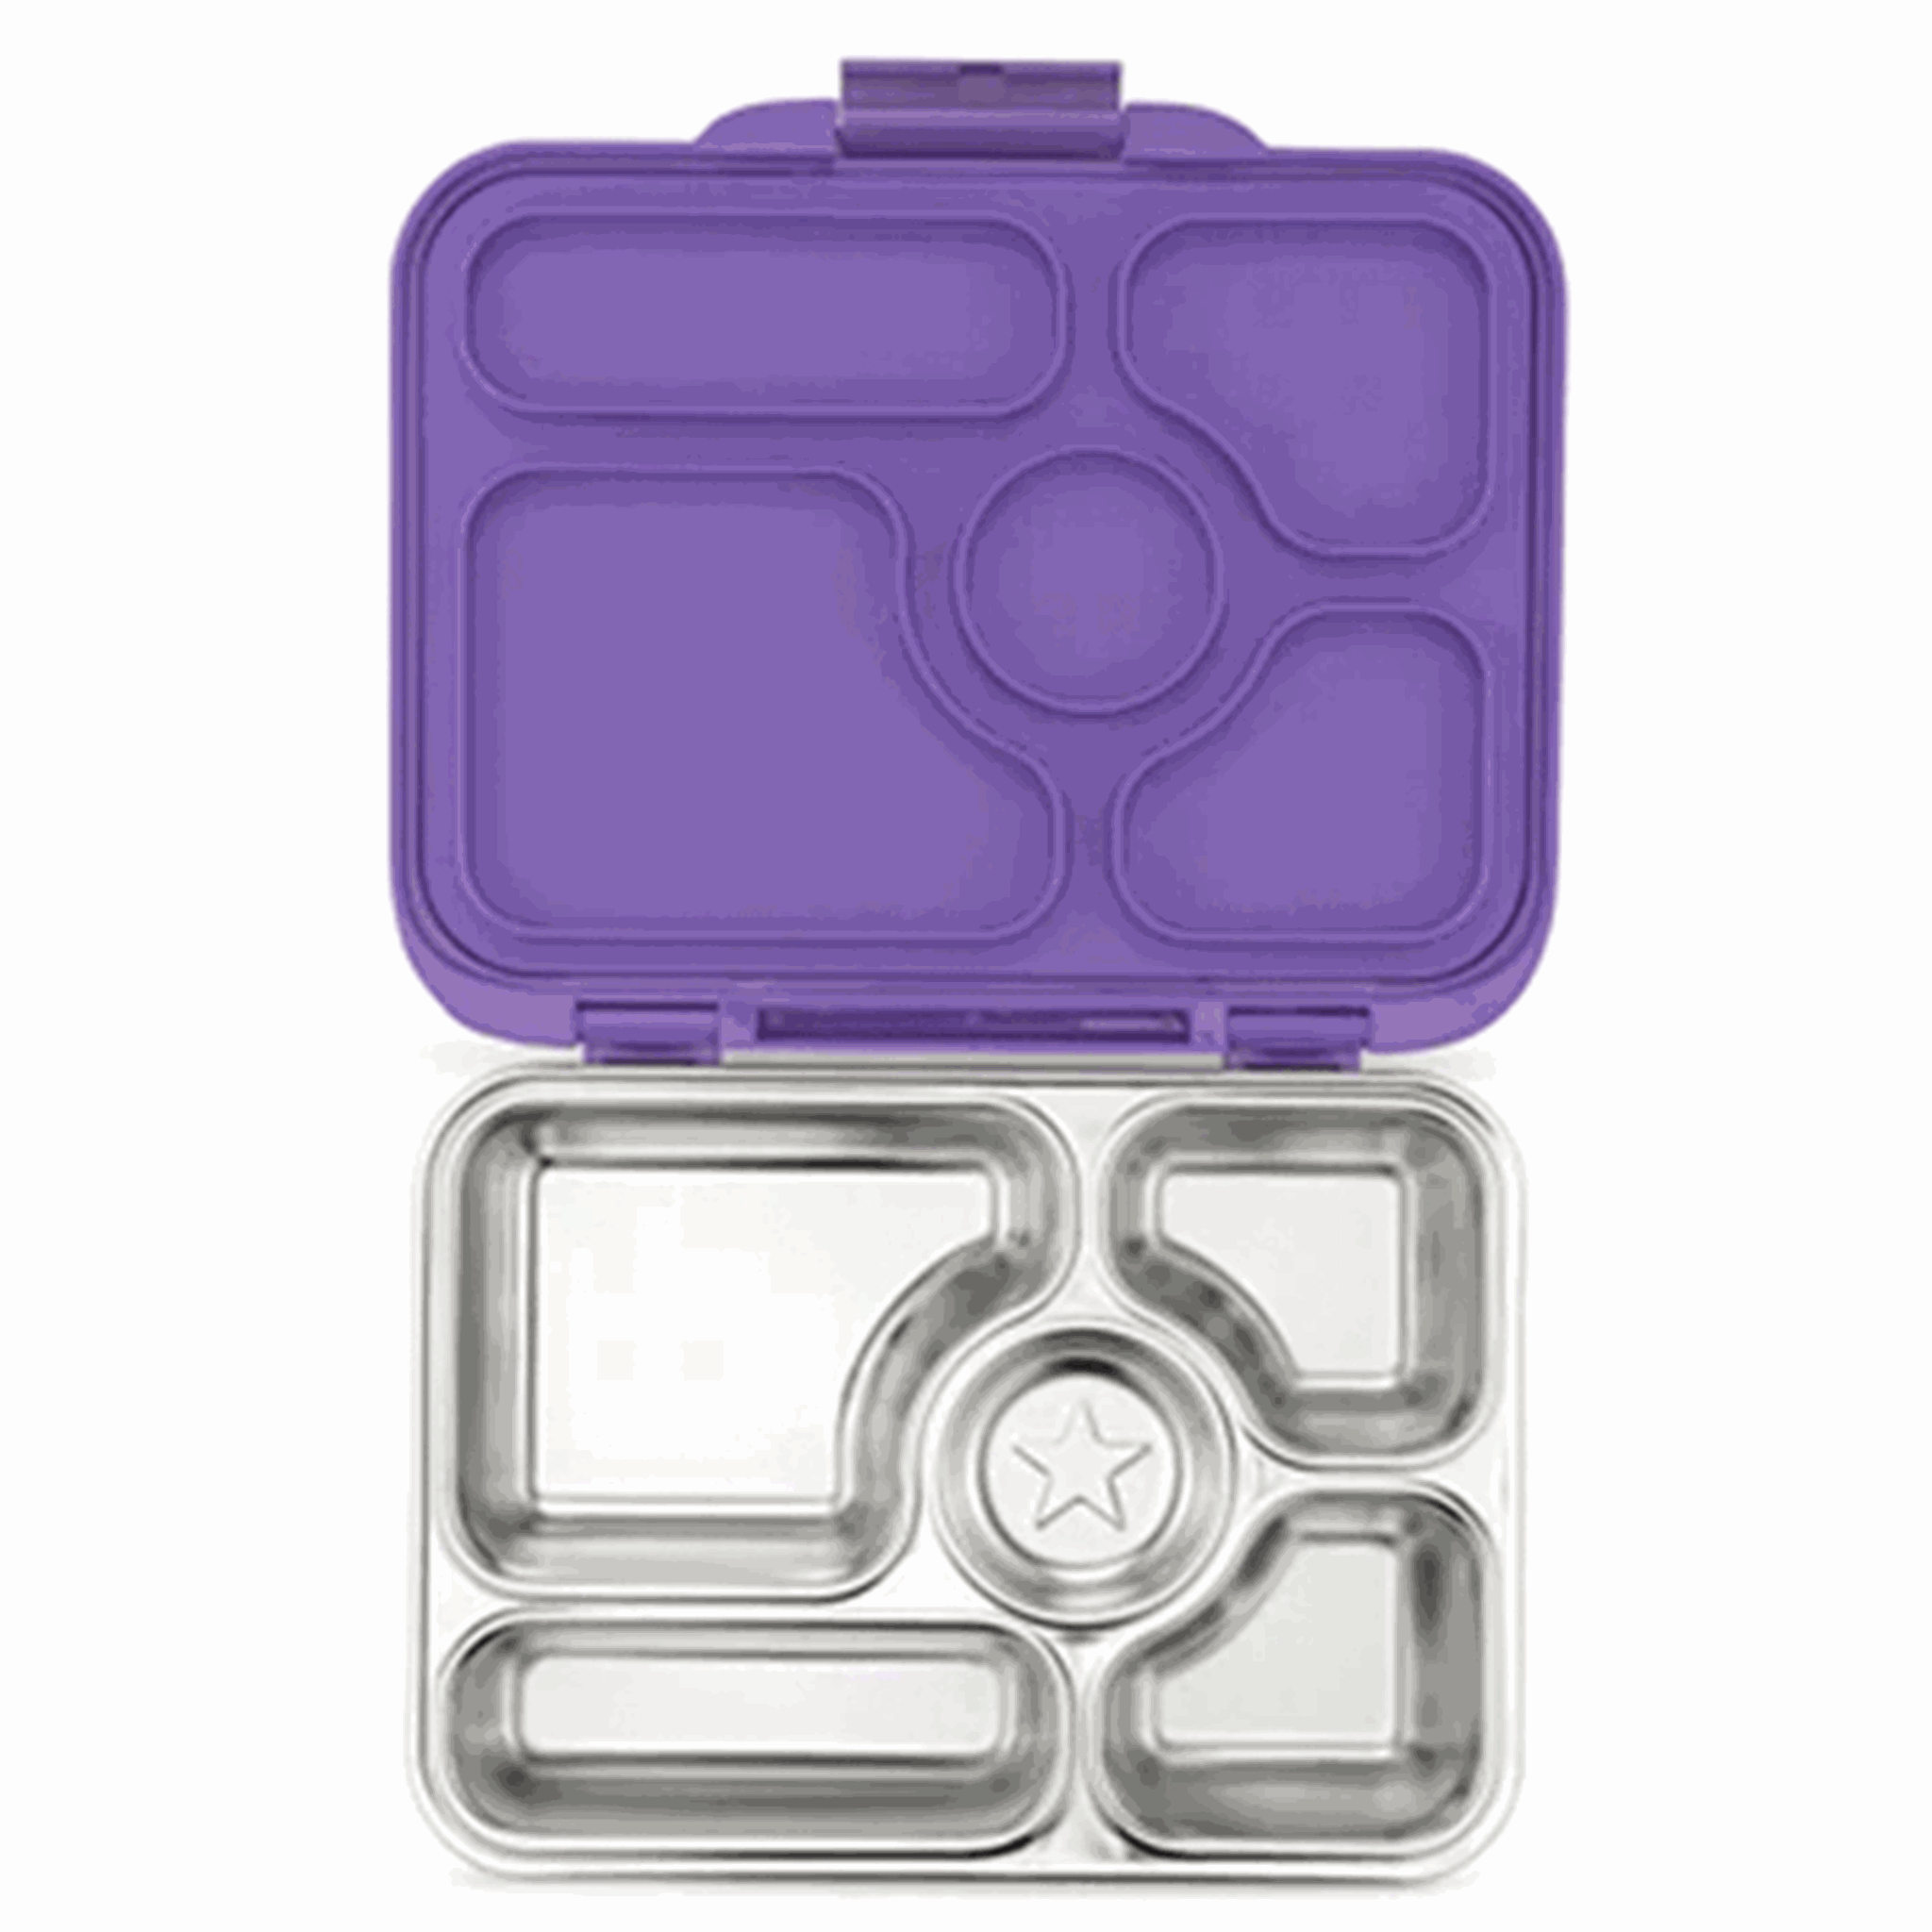 Yumbox Presto Stainless Steel Lunch Box Remy Lavender 5